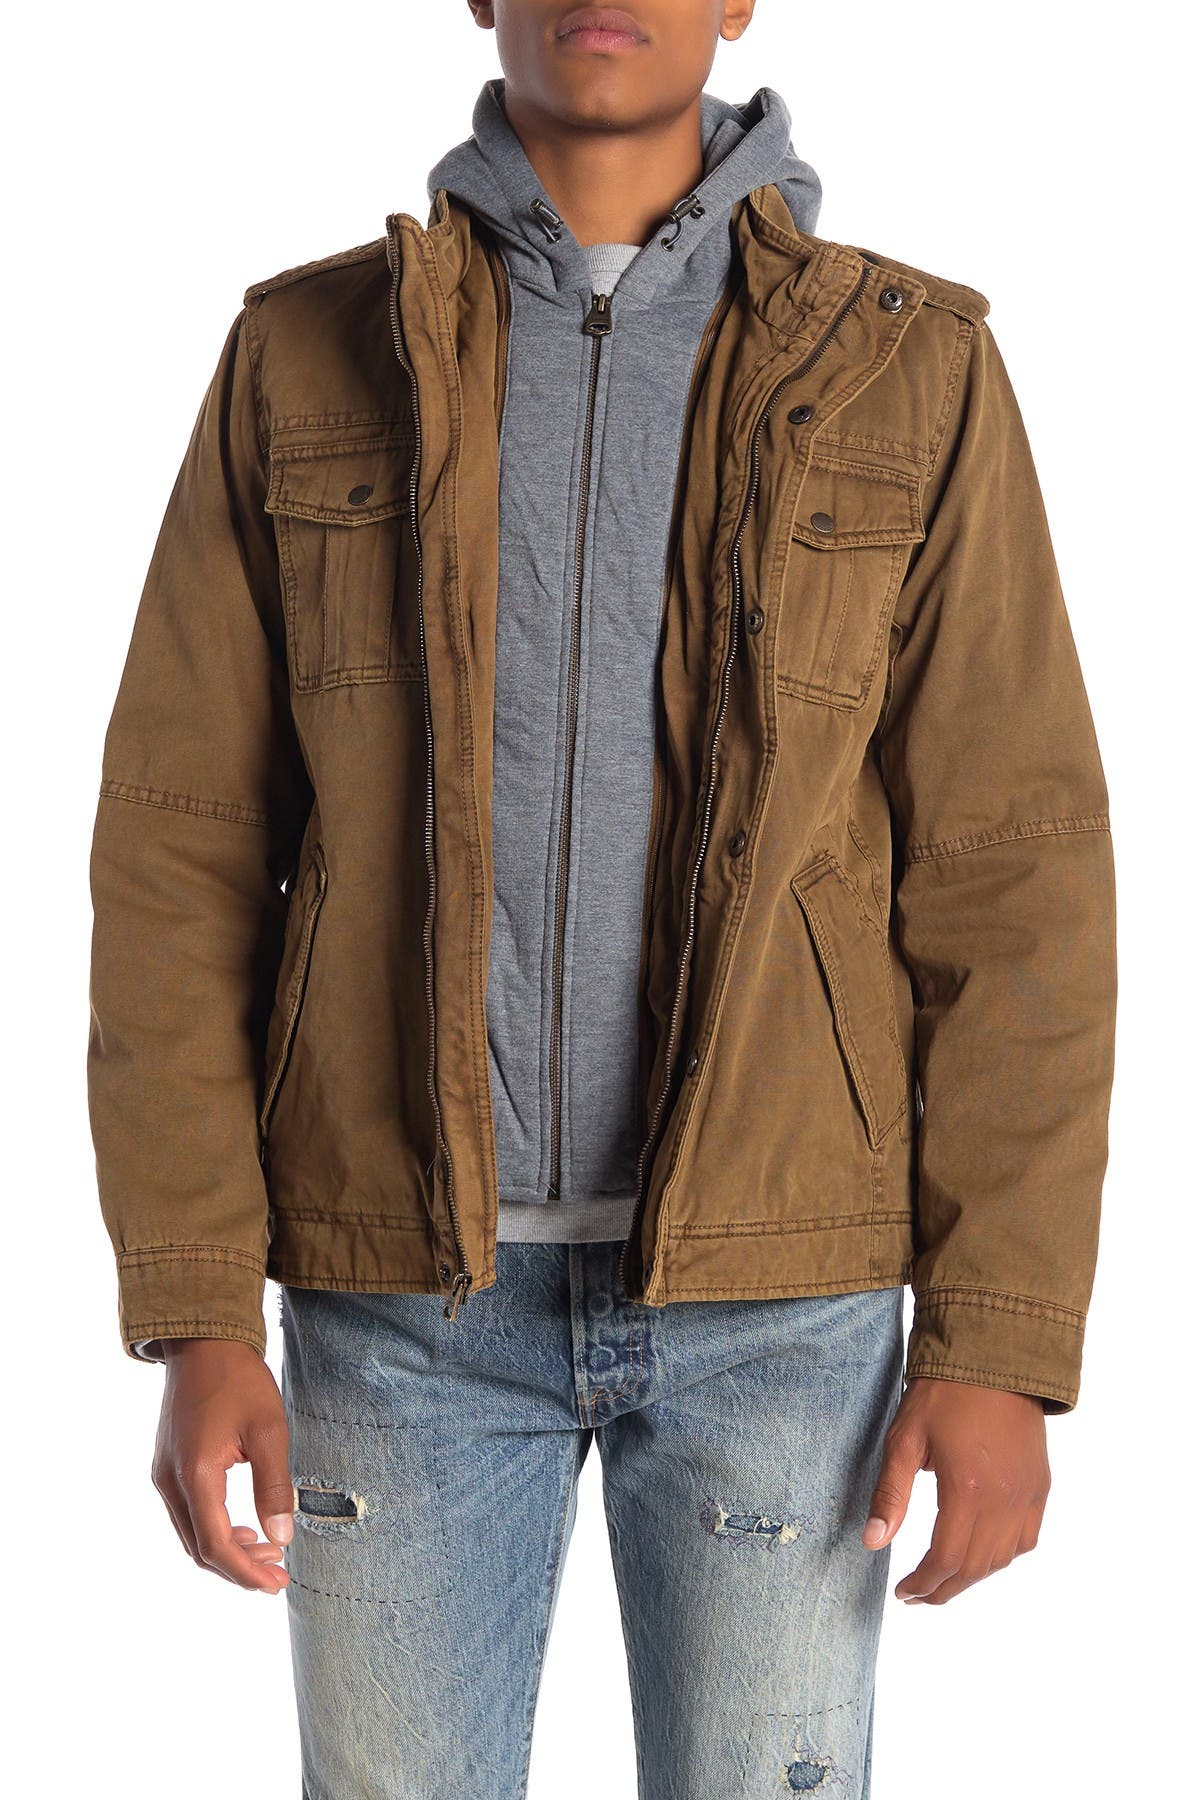 levi's faux shearling lined military jacket with hoodie